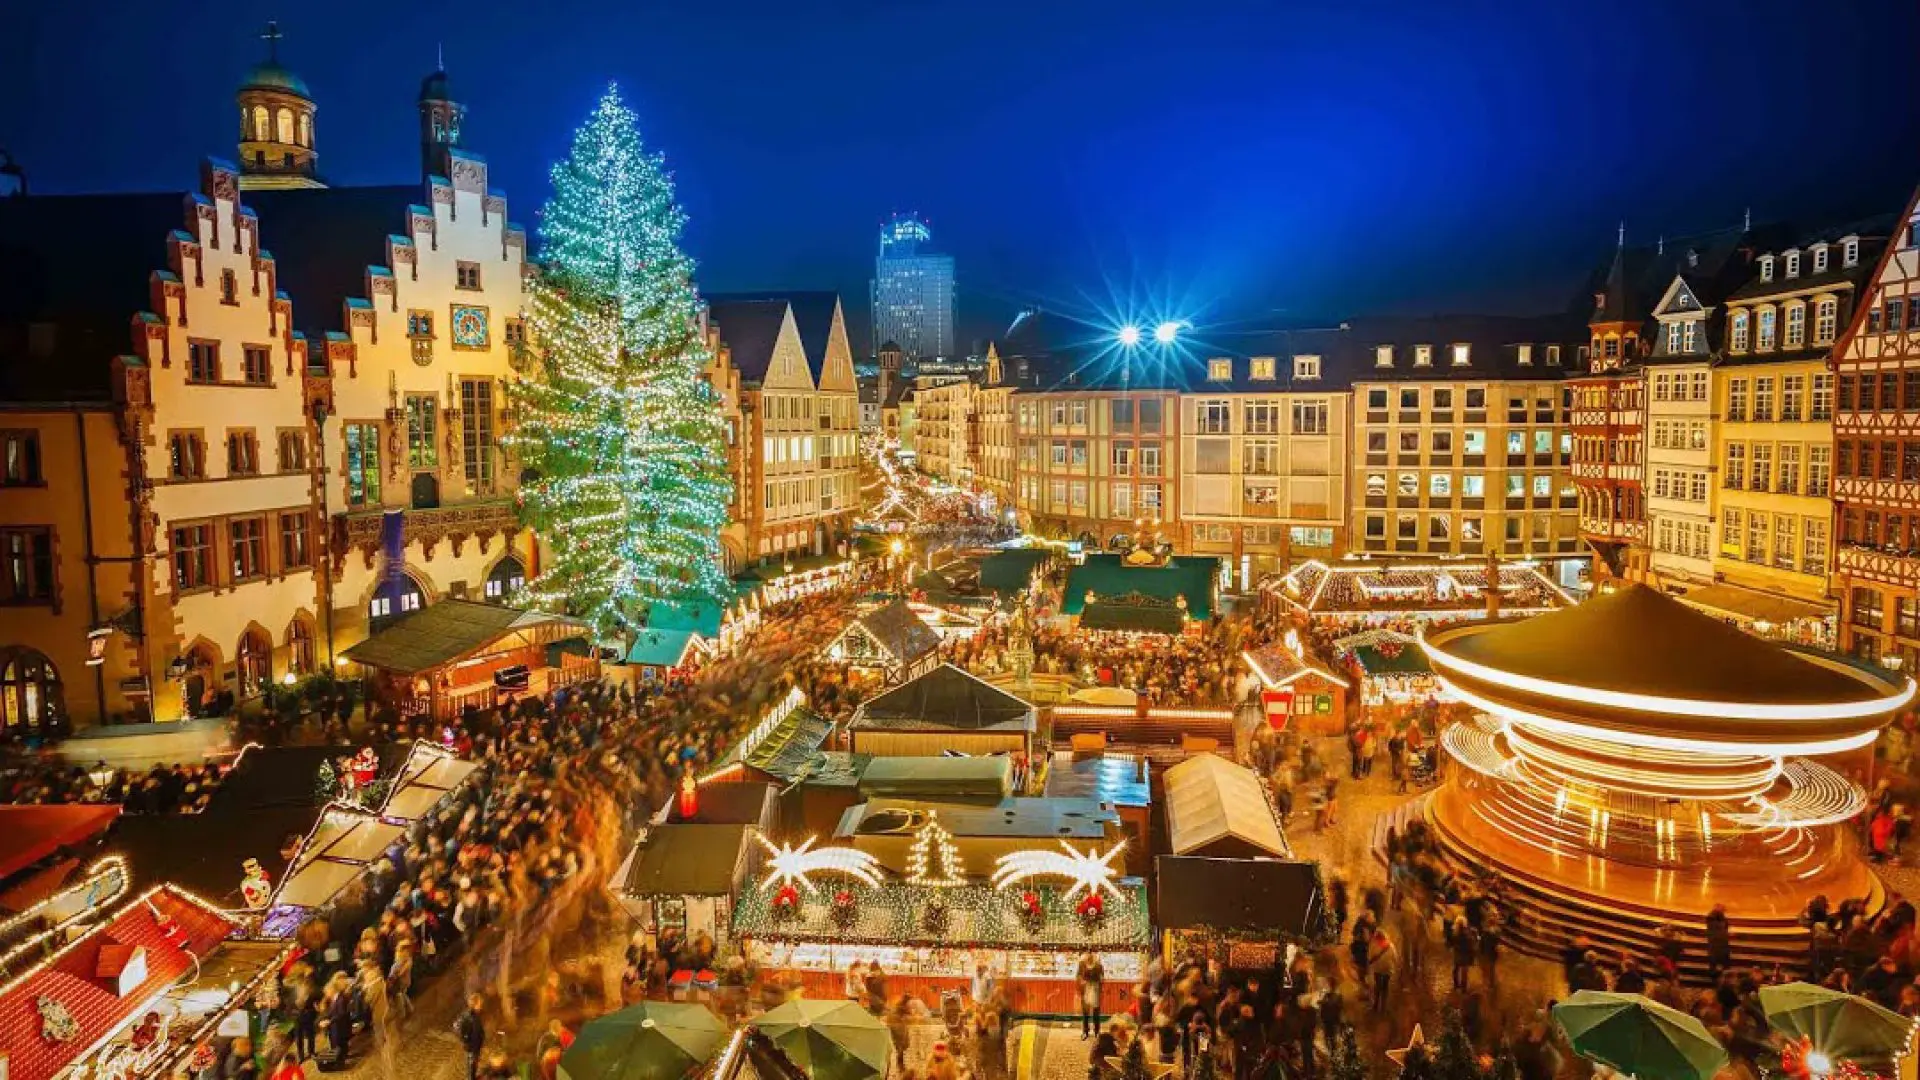 Grand Place in Bruseels, Belgium is one the best christmas market in Europe for 2022